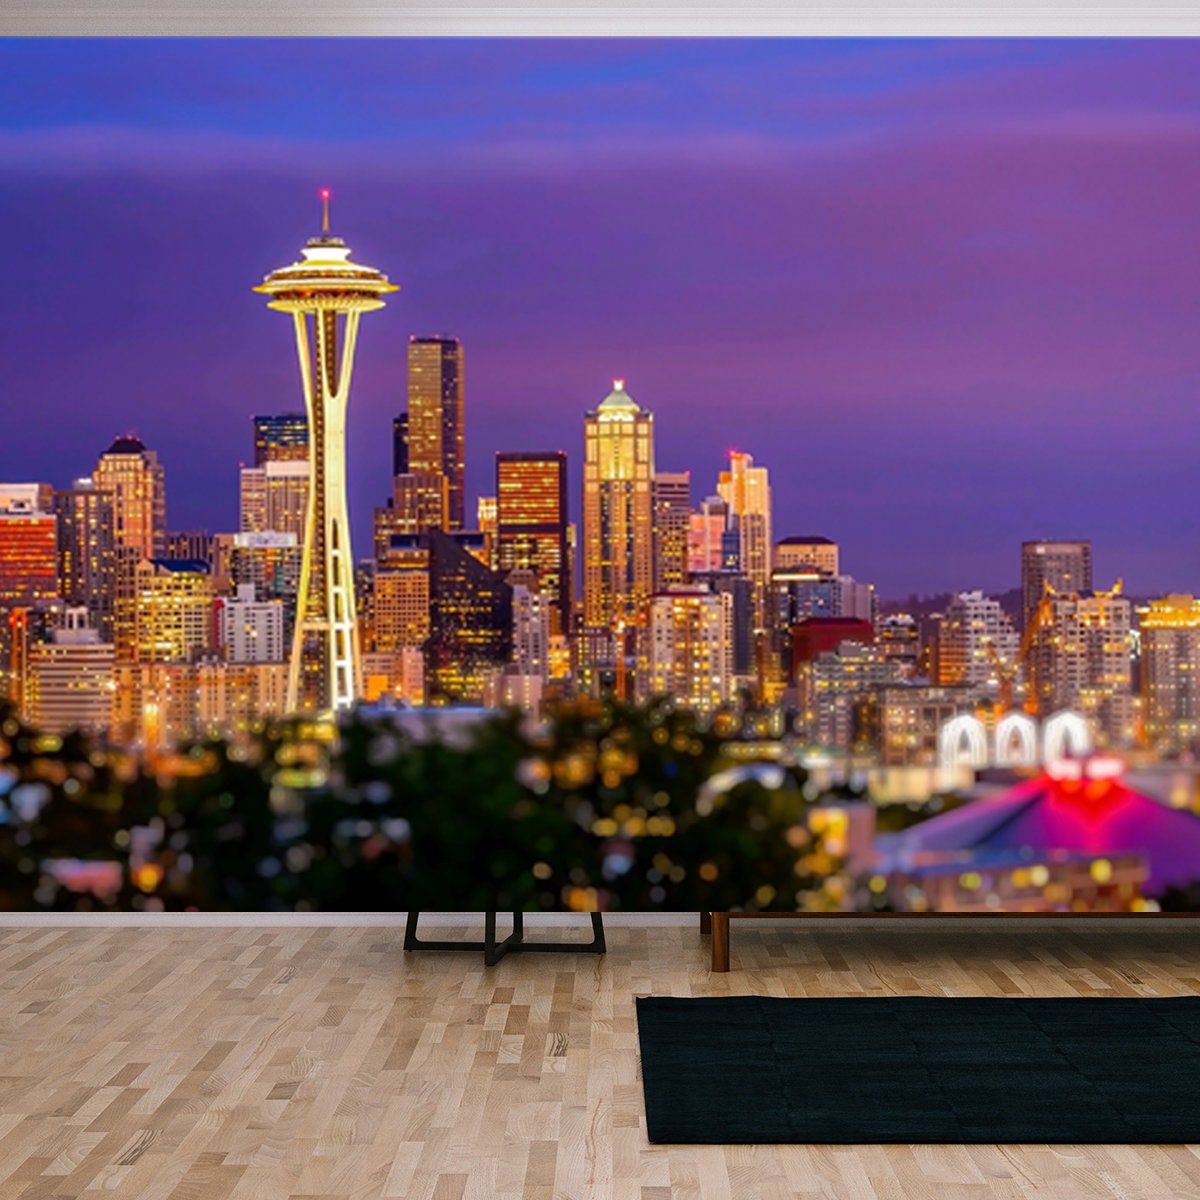 Seattle City Skyline at Dusk. Downtown Seattle Cityscape at Night Wallpaper Living Room Mural